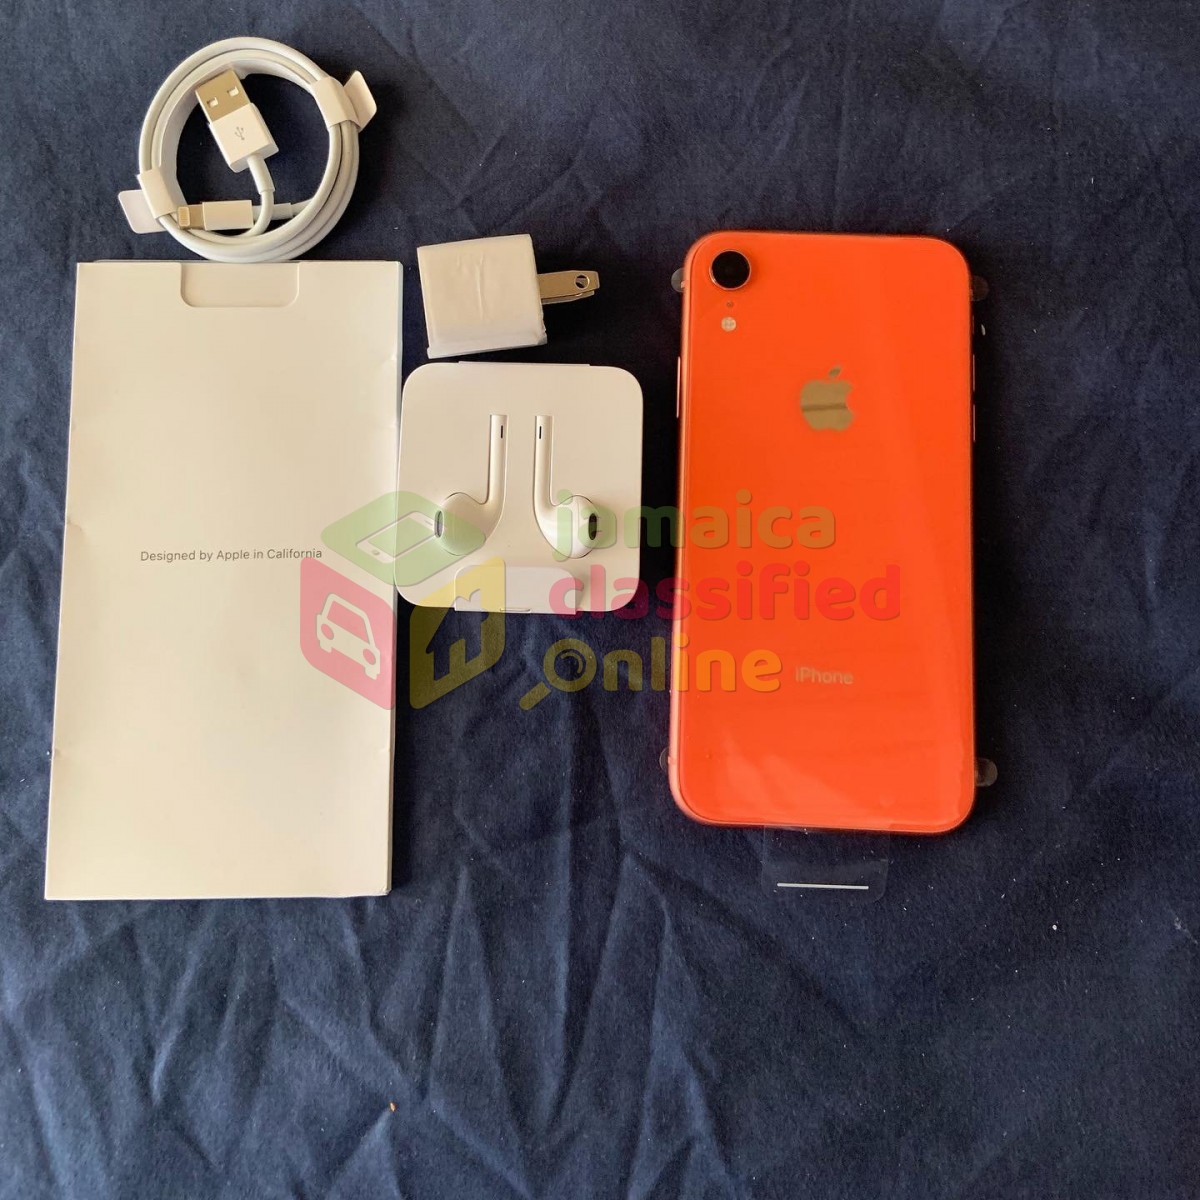 IPHONE XR Coral 64GB for sale in Kingston Kingston St Andrew - Phones